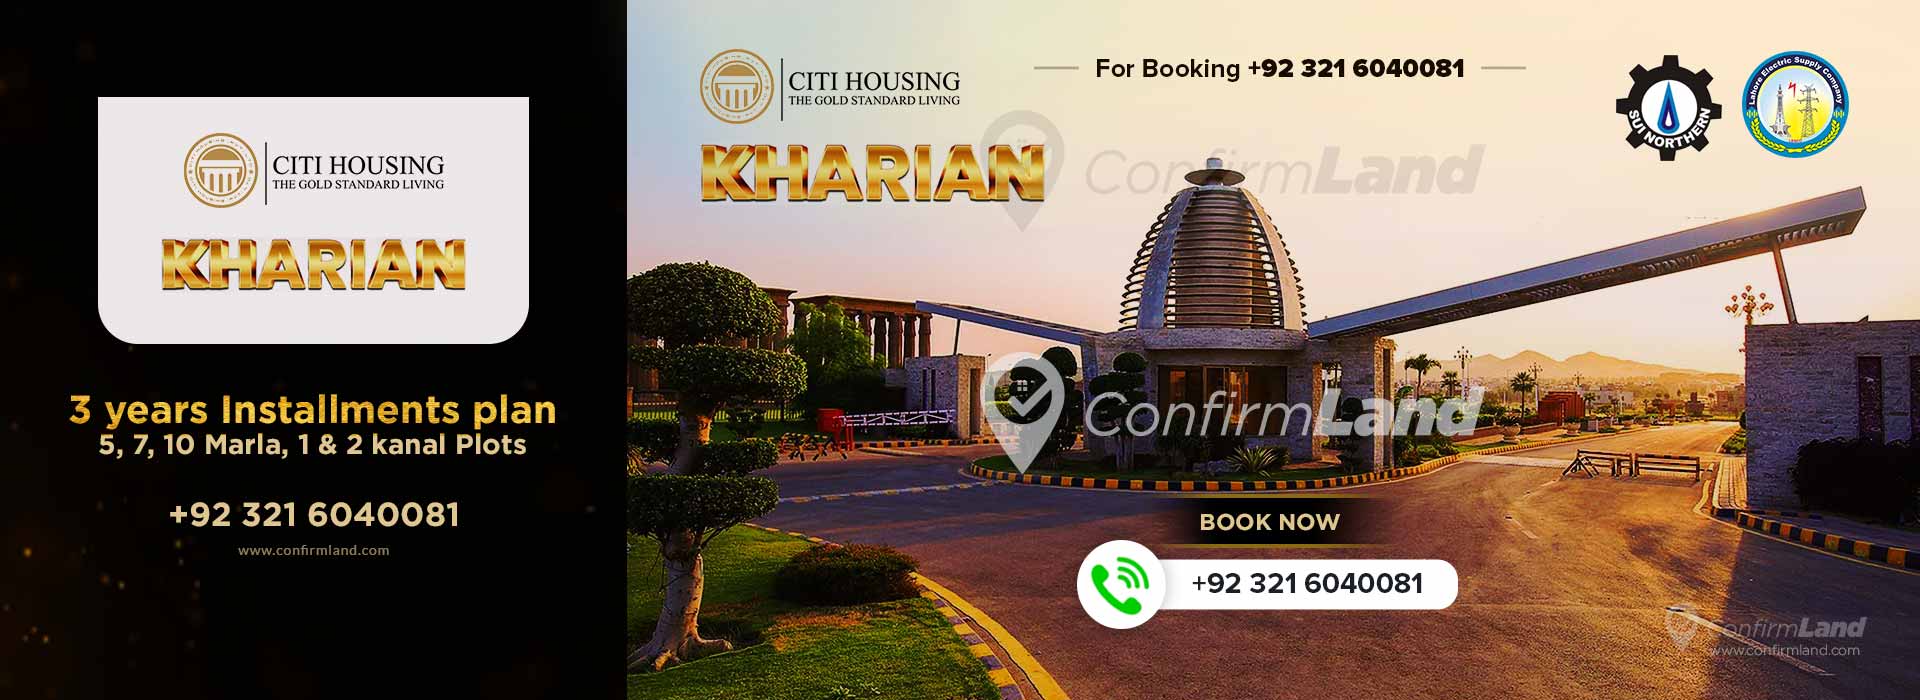 Citi Housing Kharian Payment Plan Location contact number